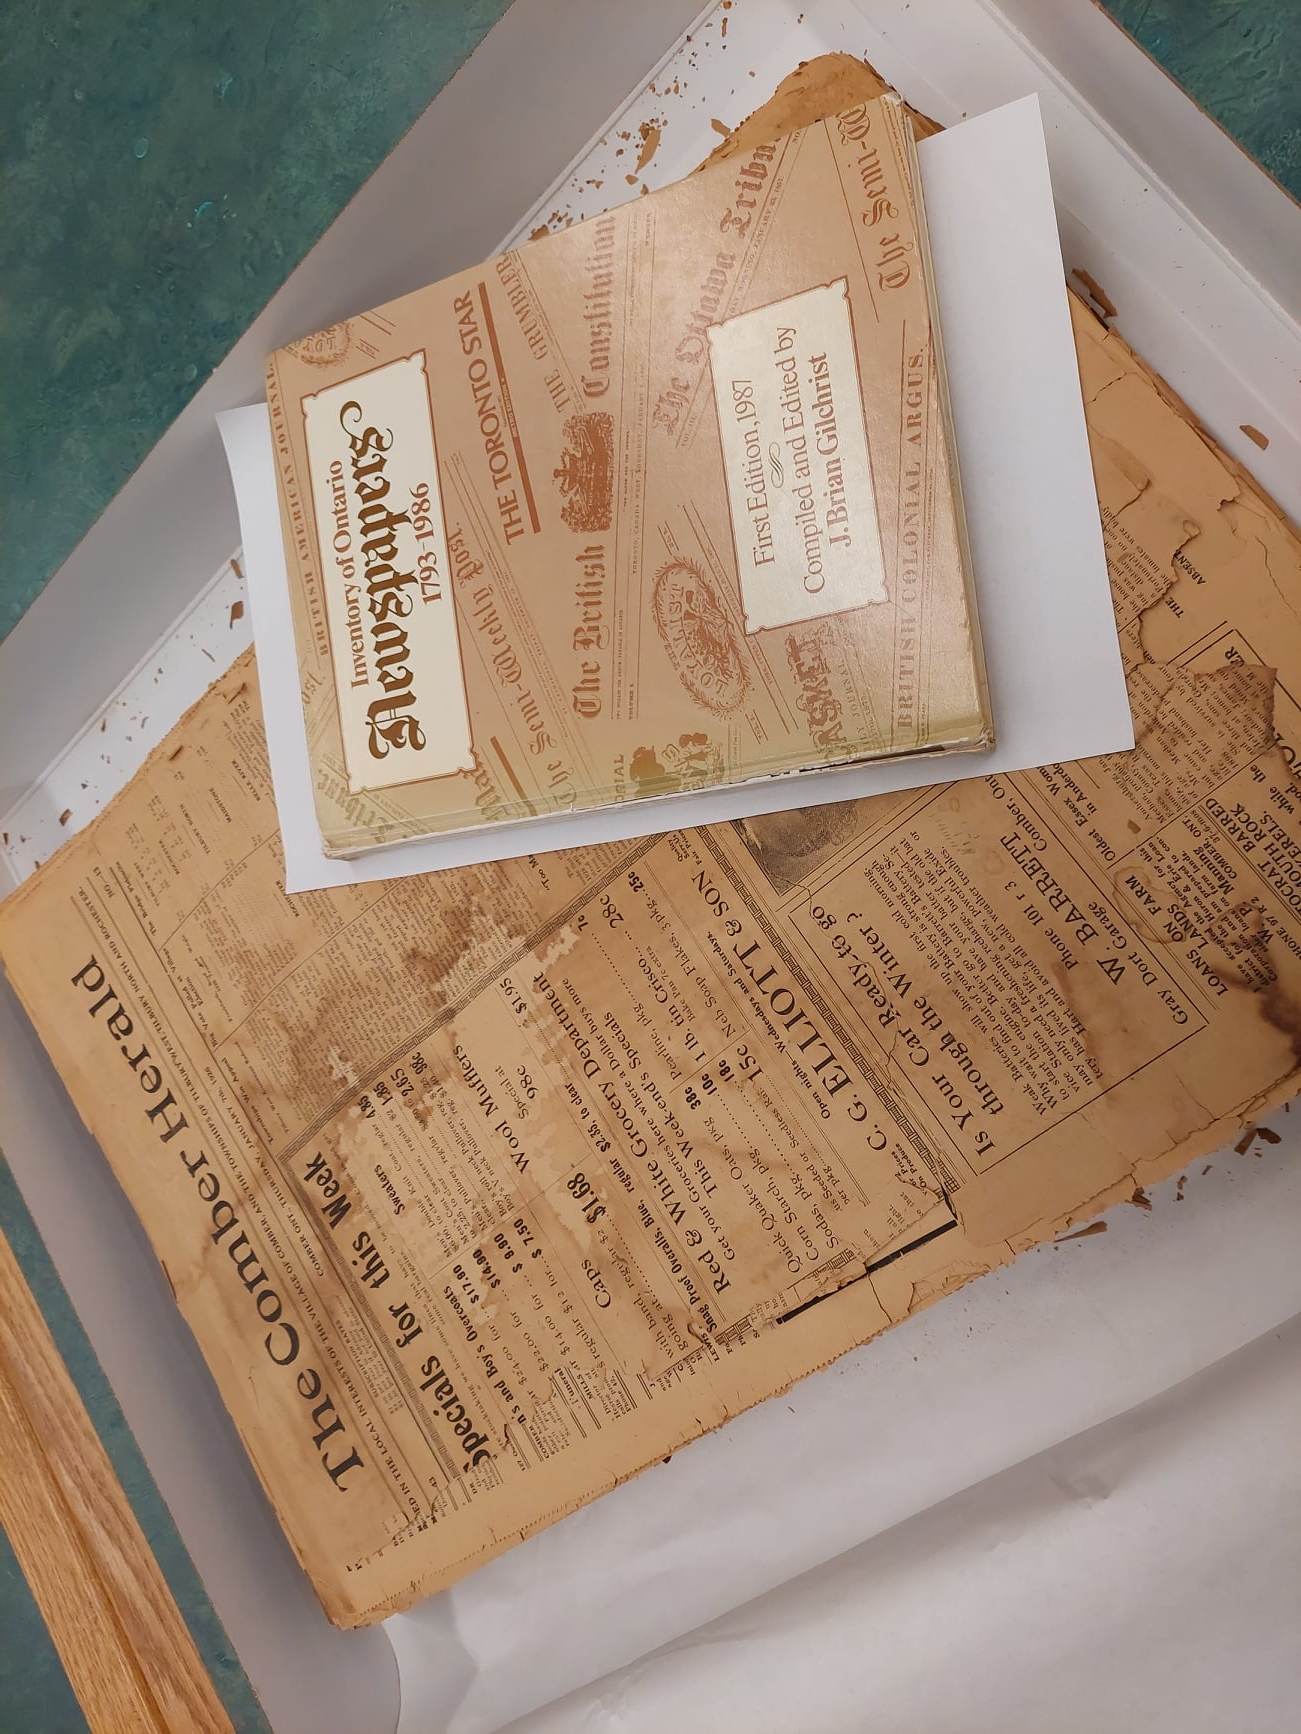 Image of a yellowed newspaper page from early 20th century, underneath a copy of a 1987 book index to historical newspapers.